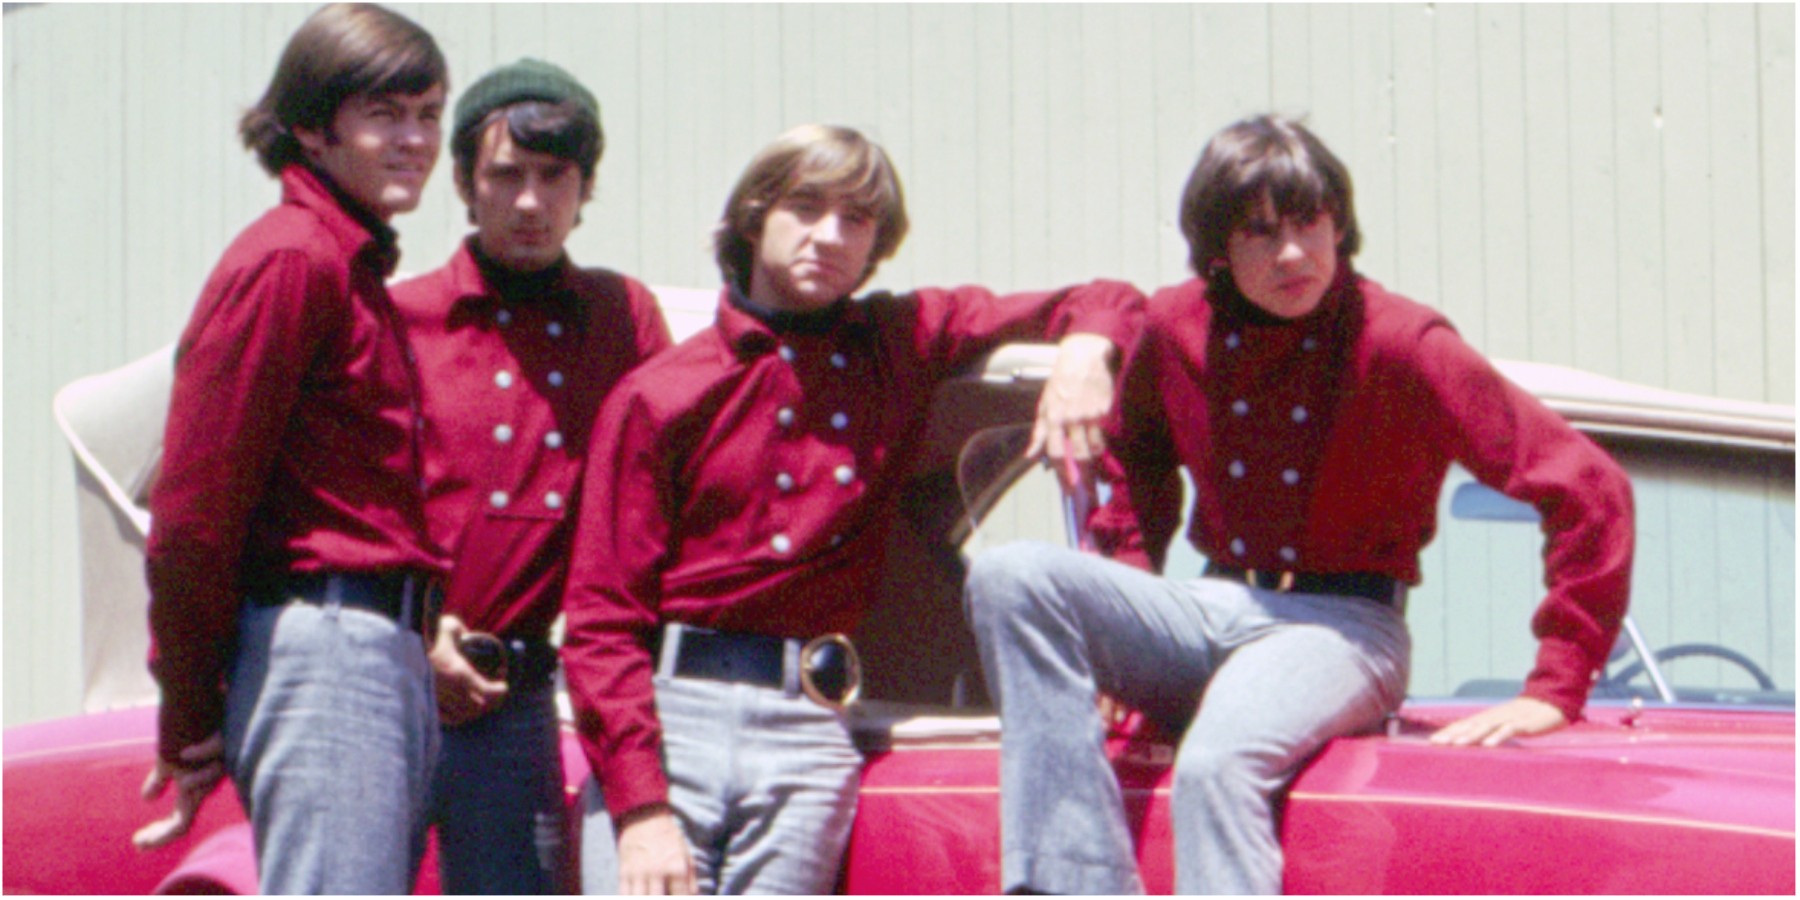 Micky Dolenz, Mike Nesmith, Peter Tork, and Davy Jones on 'The Monkees' set.